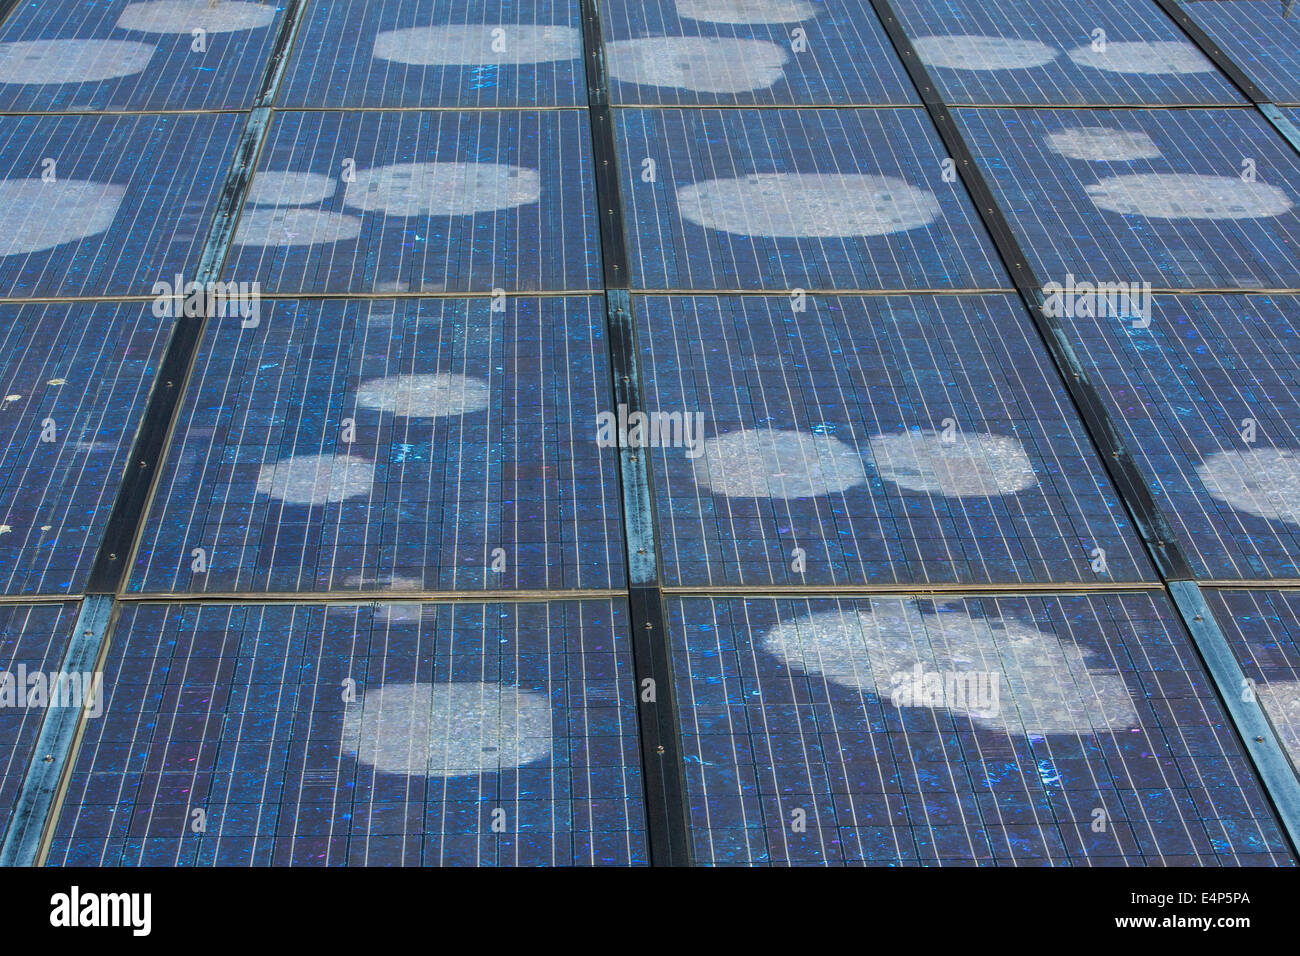 Solar panels, partly broken with stains, Stock Photo